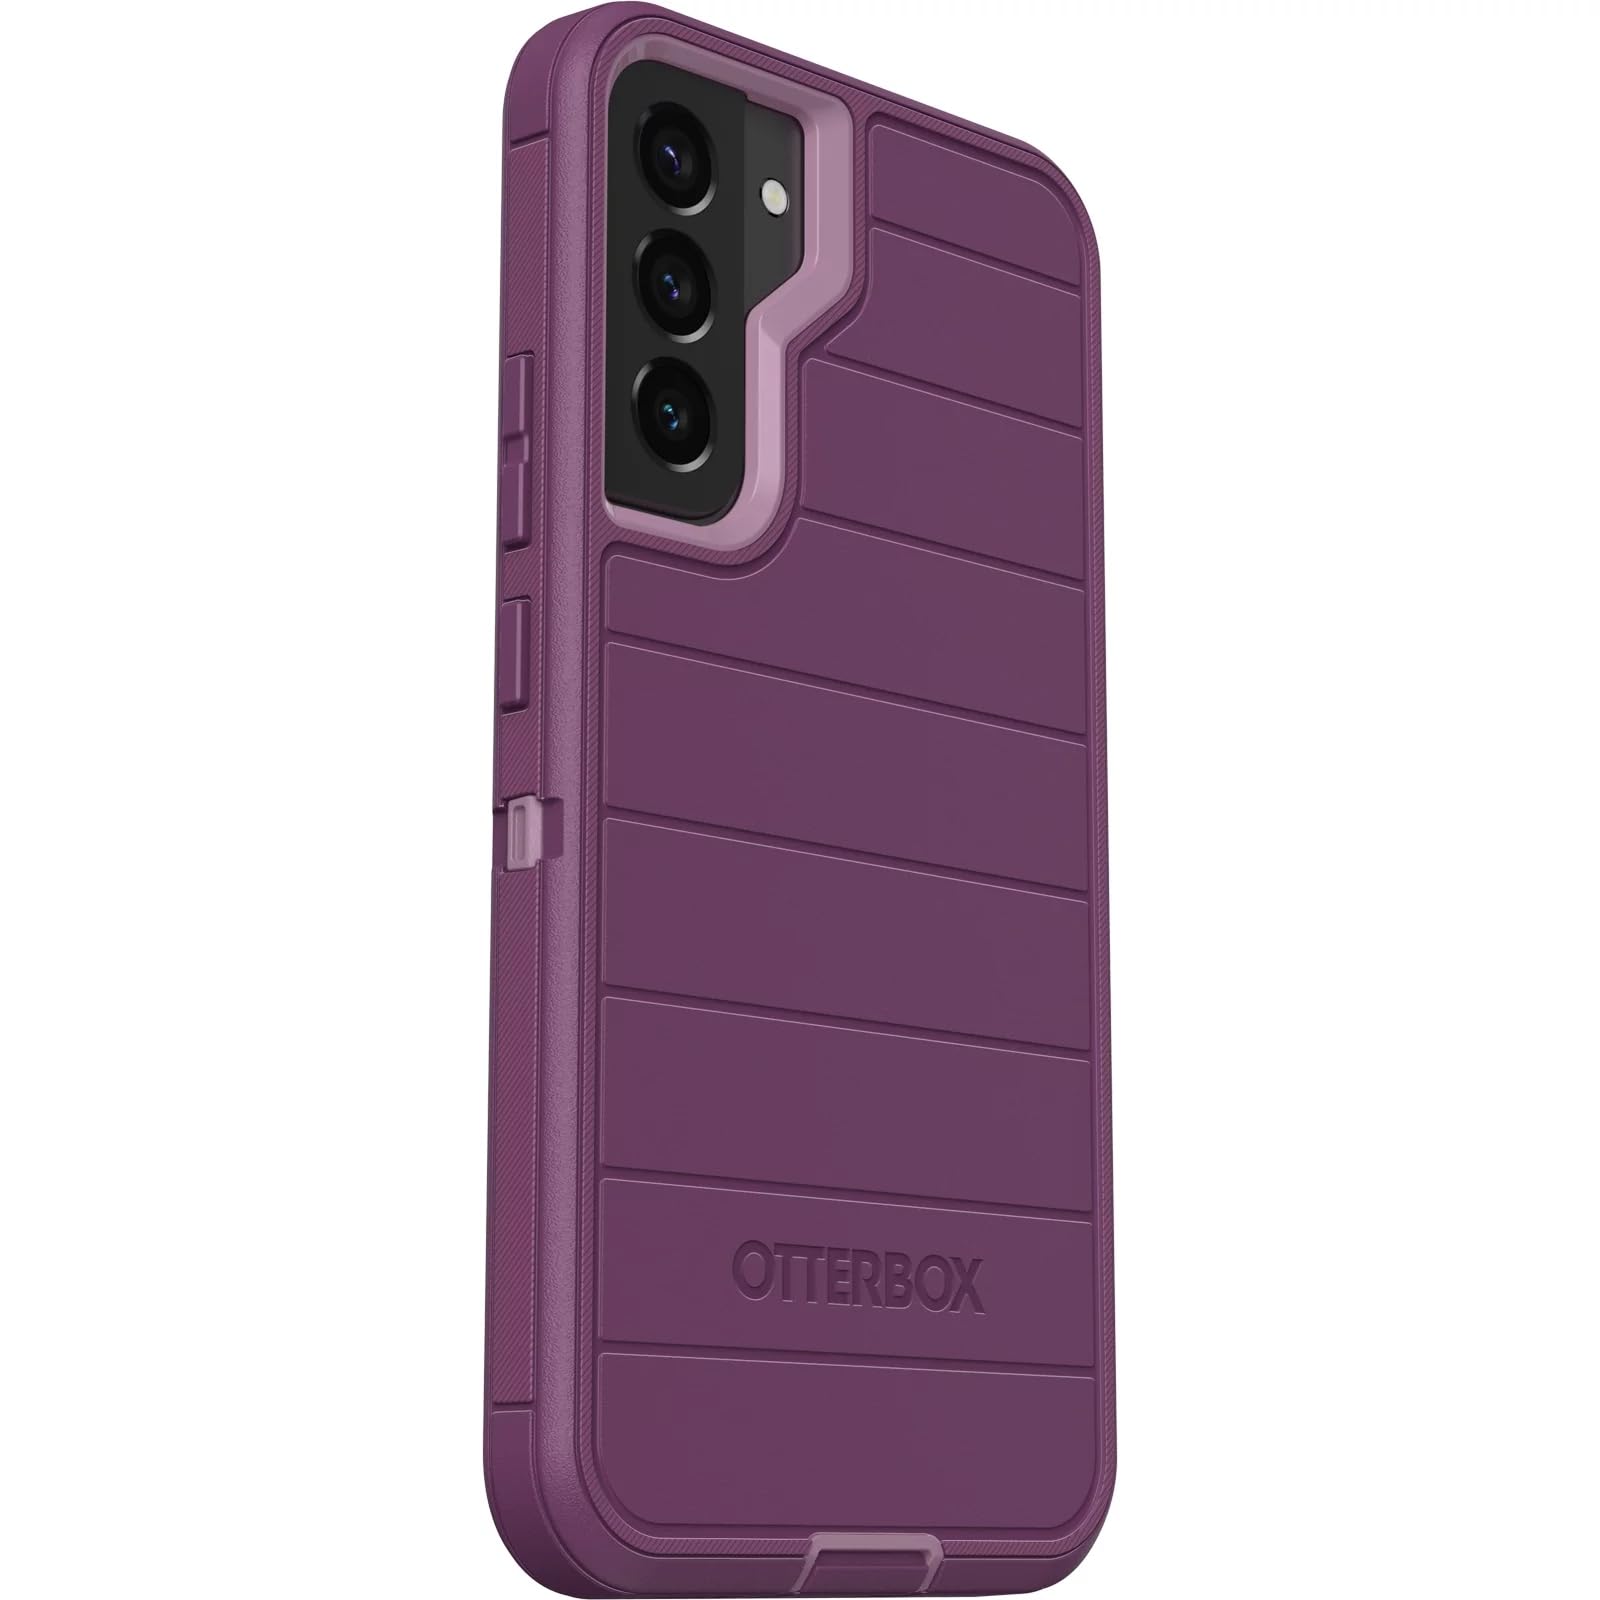 OtterBox Defender Series Case for Samsung Galaxy S22 (Only) - Case Only - Microbial Defense Protection - Non-Retail Packaging - Happy Purple